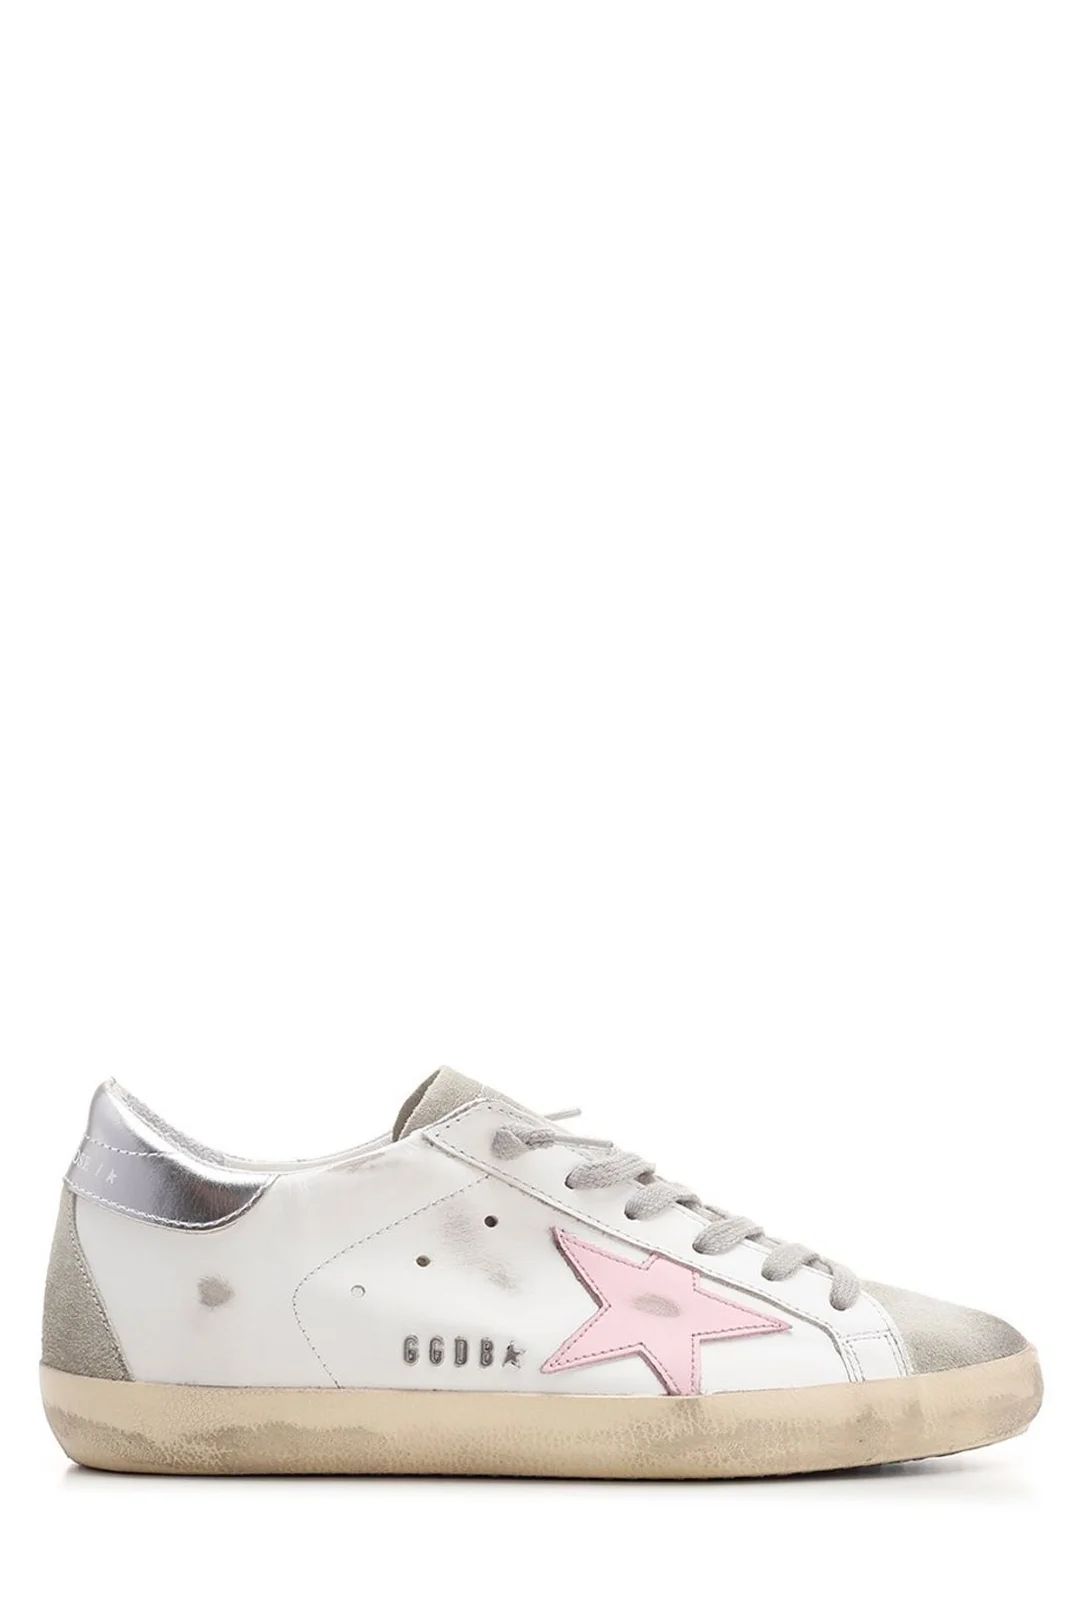 Golden Goose Deluxe Brand Star Patch Distressed Sneakers | Cettire Global